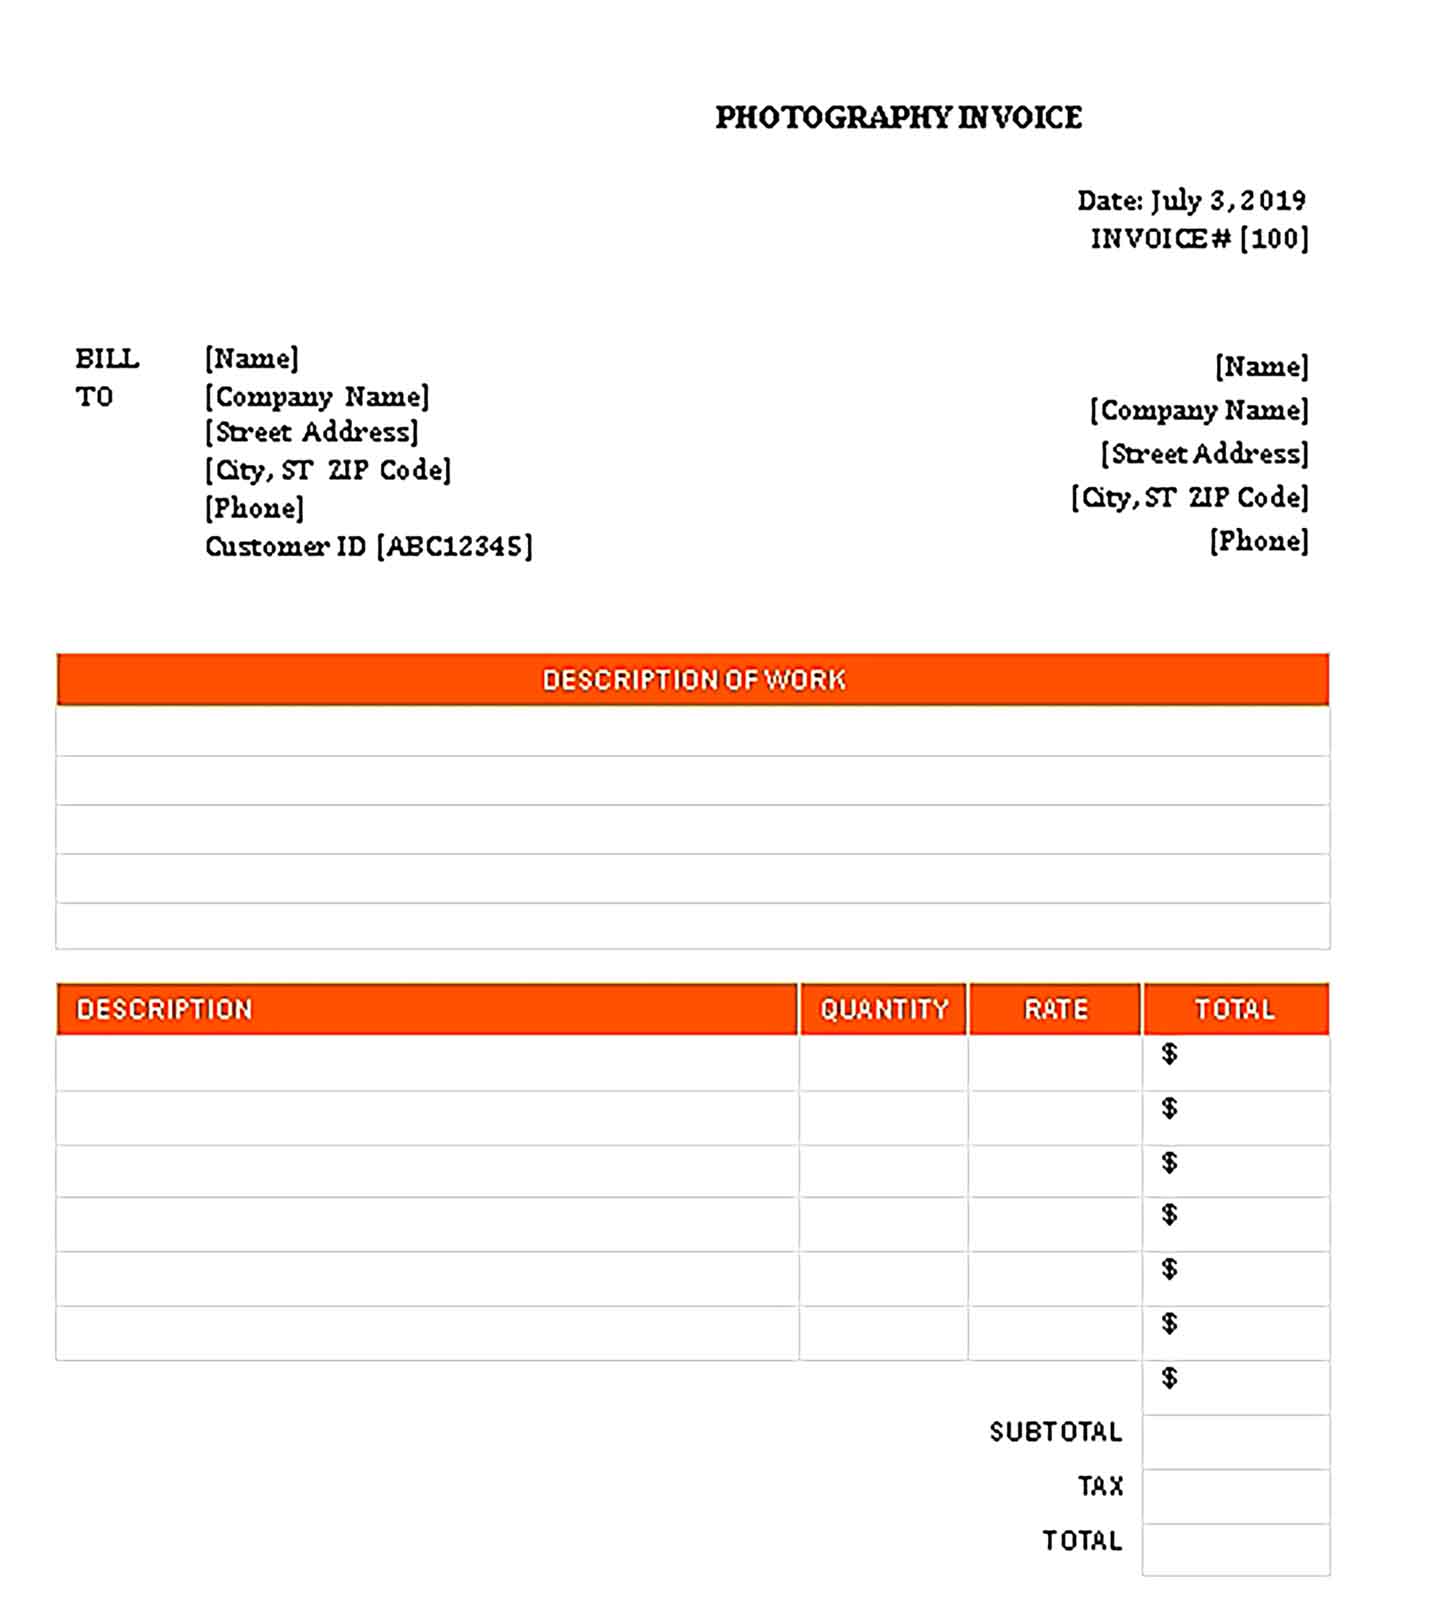 Sample Templates Photography Invoice 001